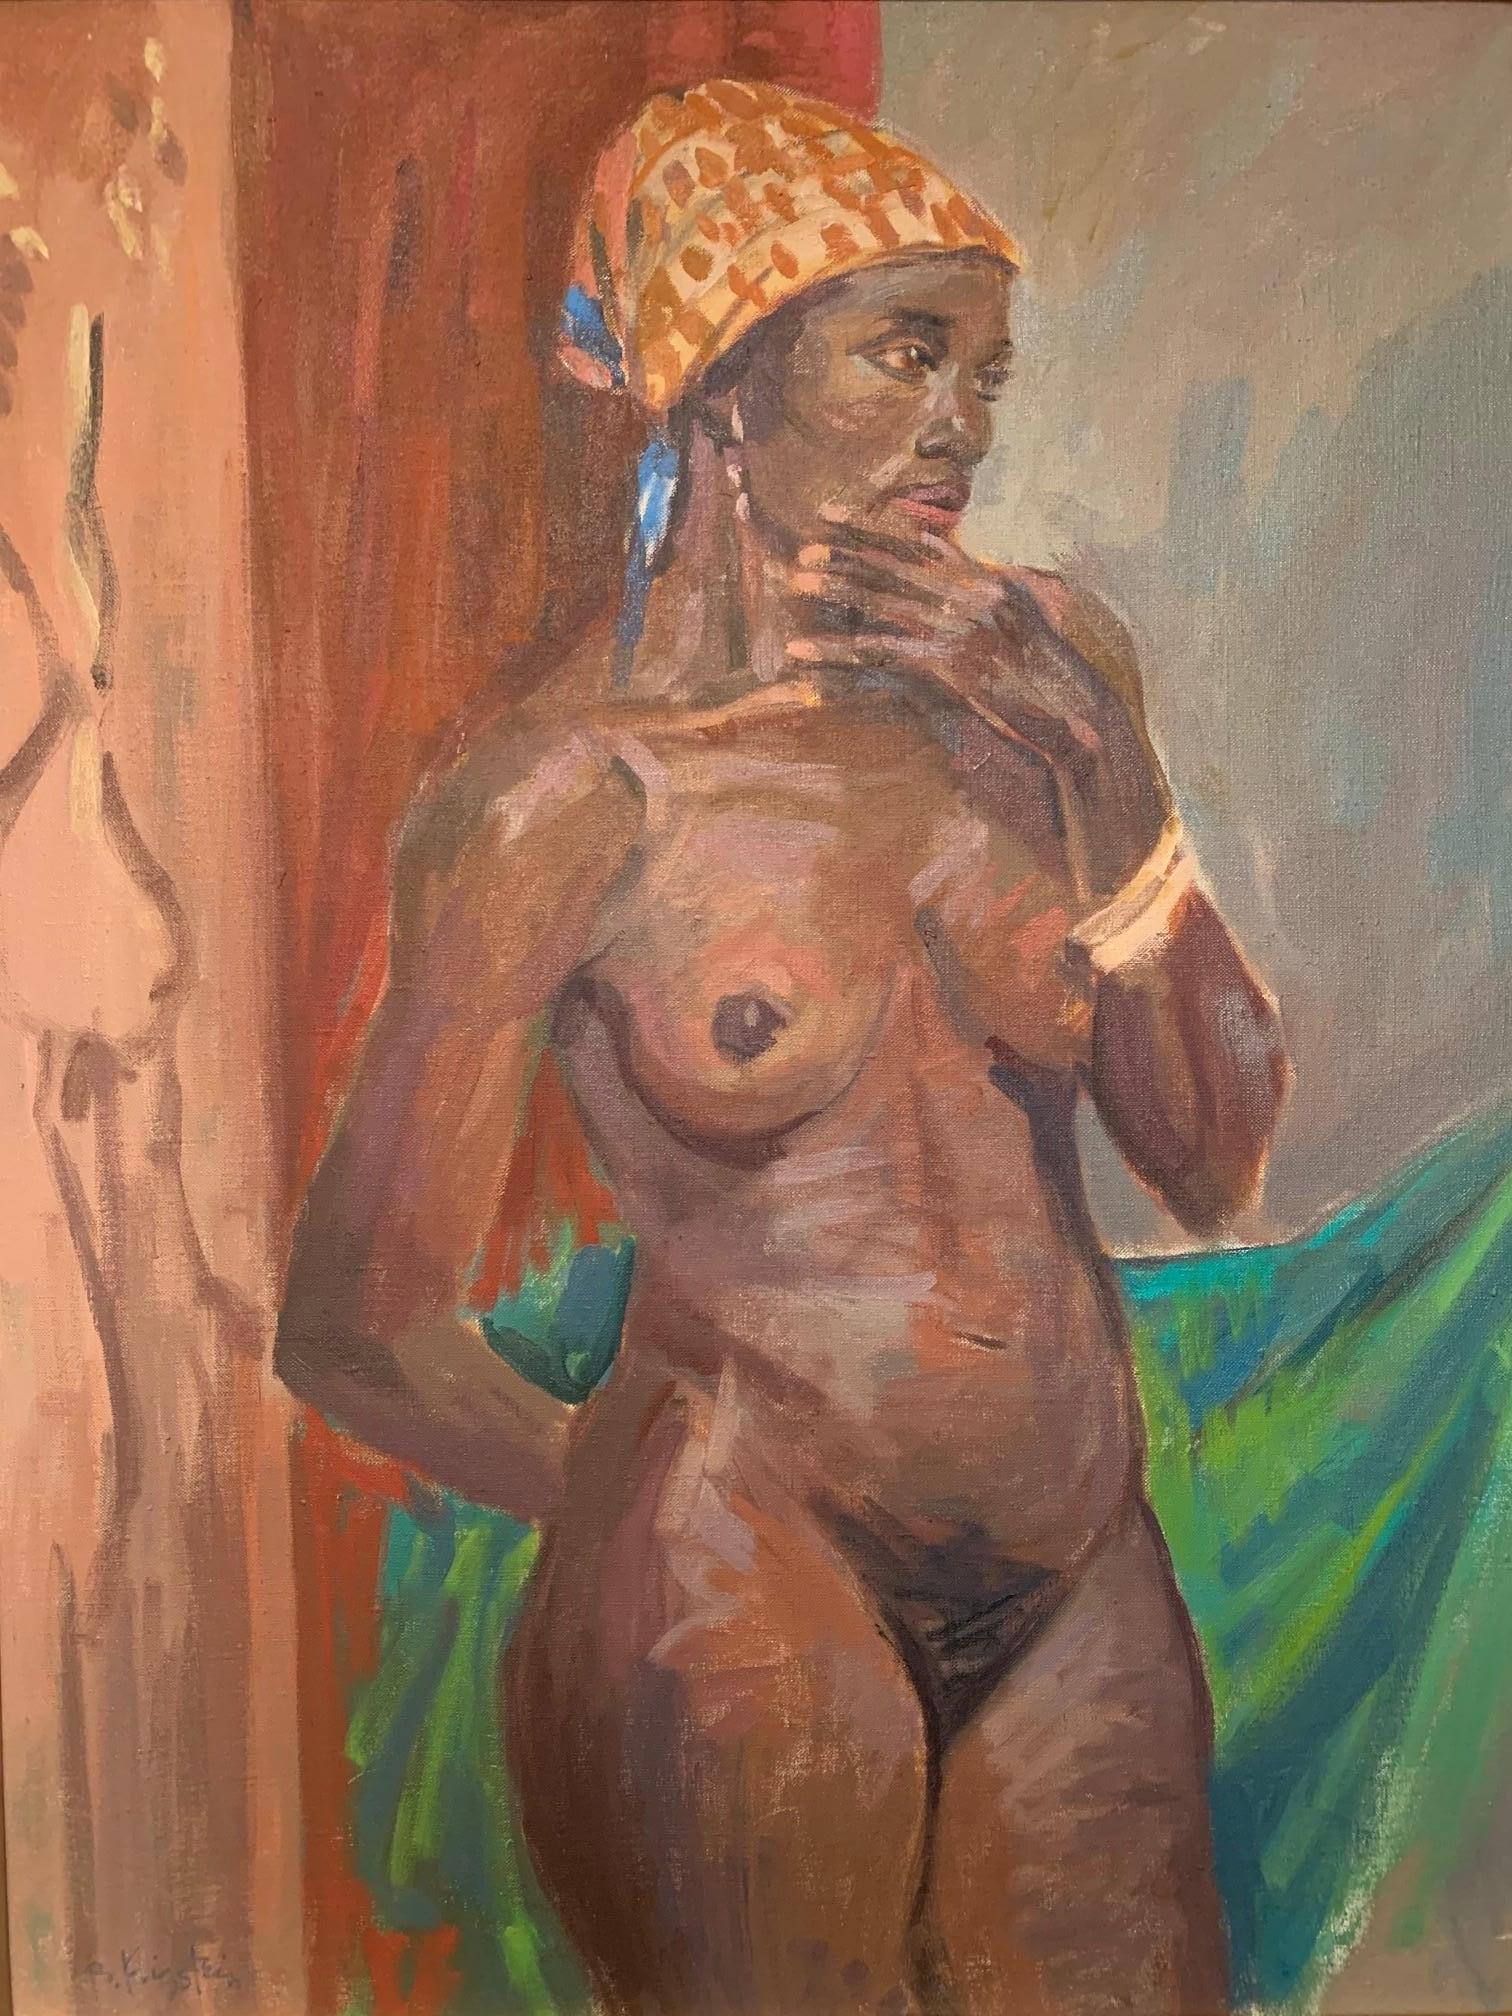 Bernard Krigstein Nude Painting - ‘African Diva’ Figurative Nude Femail Oil On Canvas Ashcan School Movement 